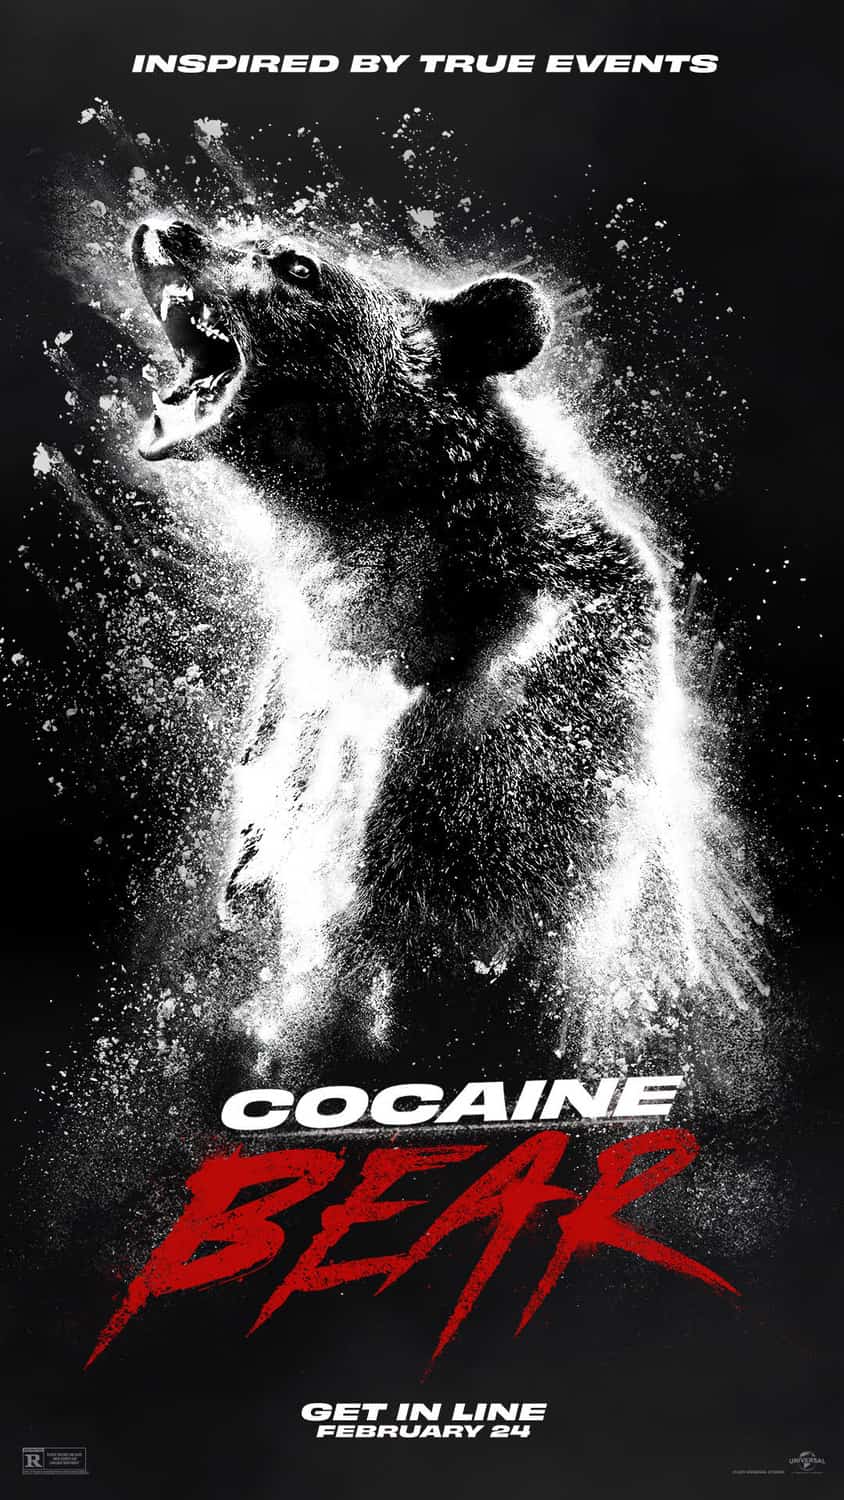 Cocaine bear is given a 15 age rating in the UK for strong gore, violence, drug references, language